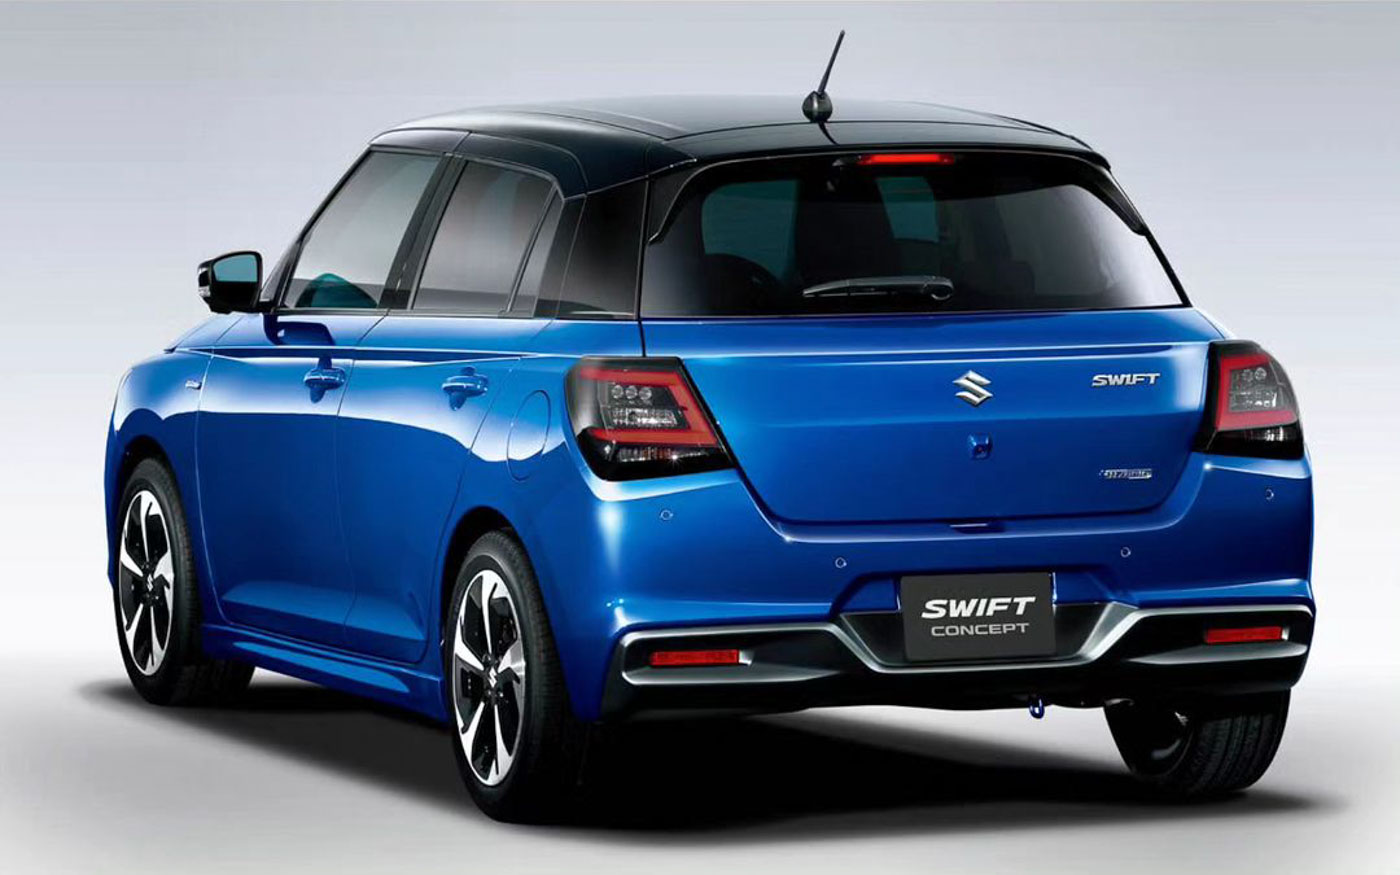 2024 Maruti Suzuki Swift: What To Expect In The All-New Model